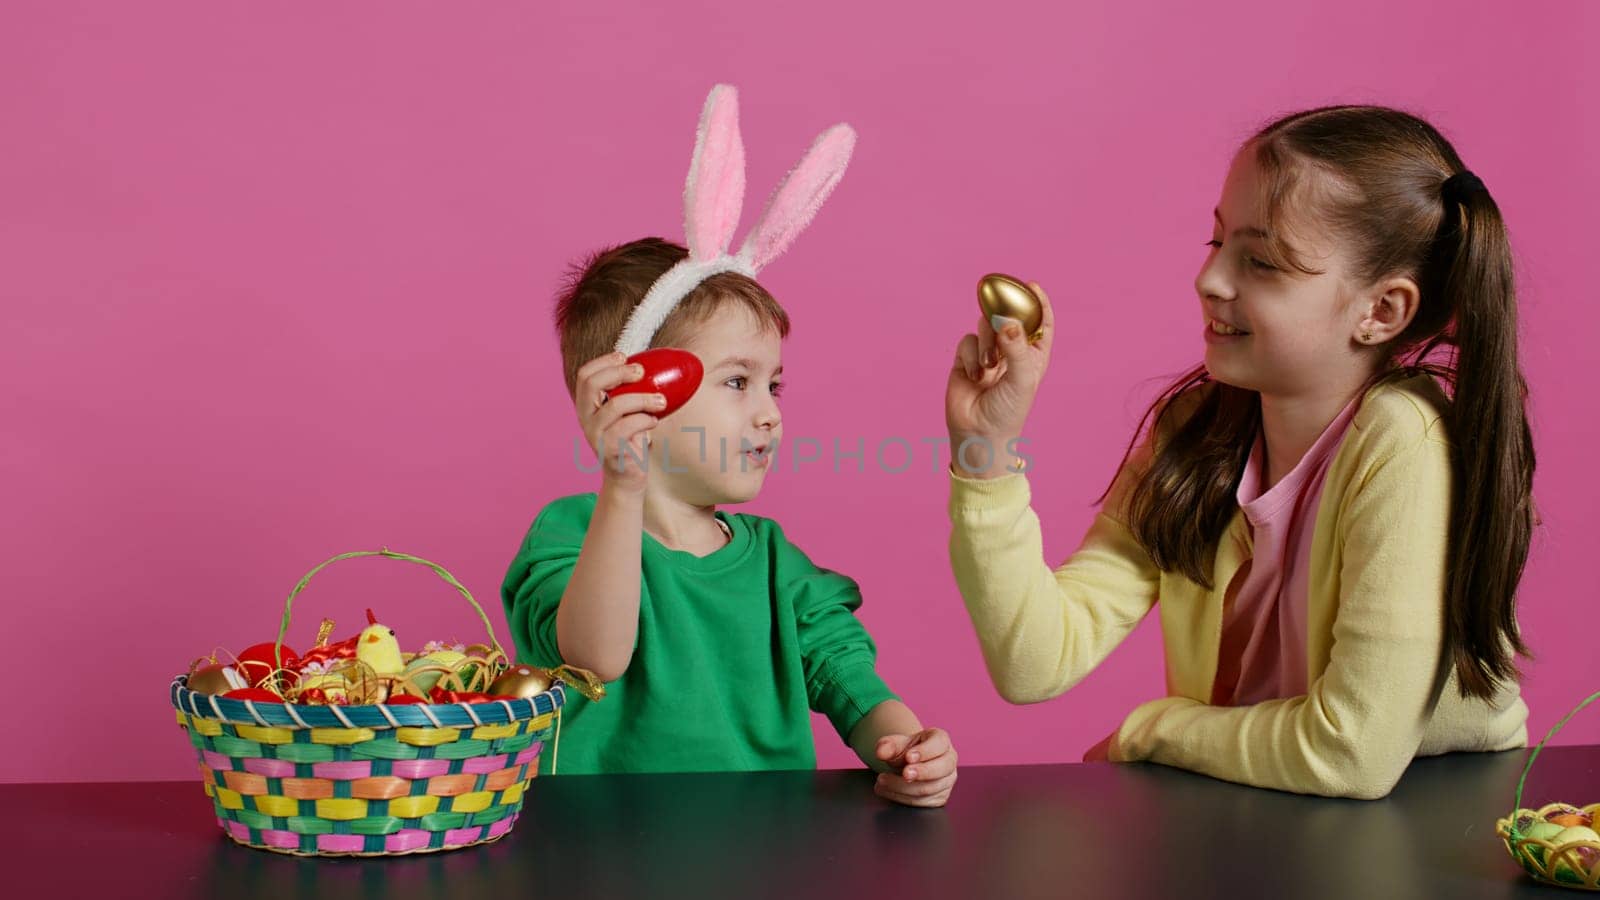 Sweet children knocking eggs together for easter tradition in studio, by DCStudio